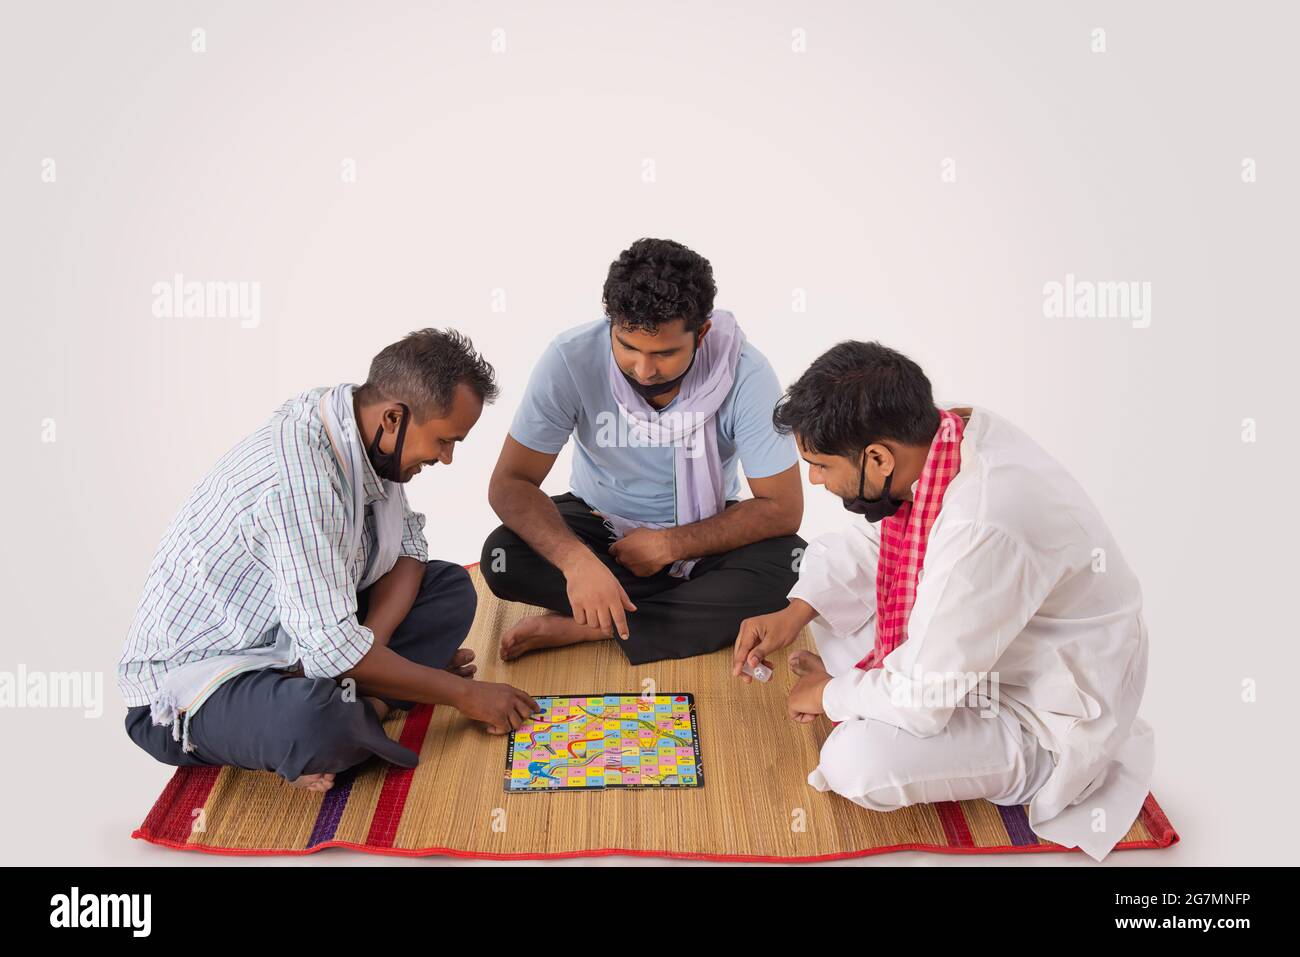 A GROUP OF FRIENDS HAPPILY PLAYING BOARD GAME Stock Photo